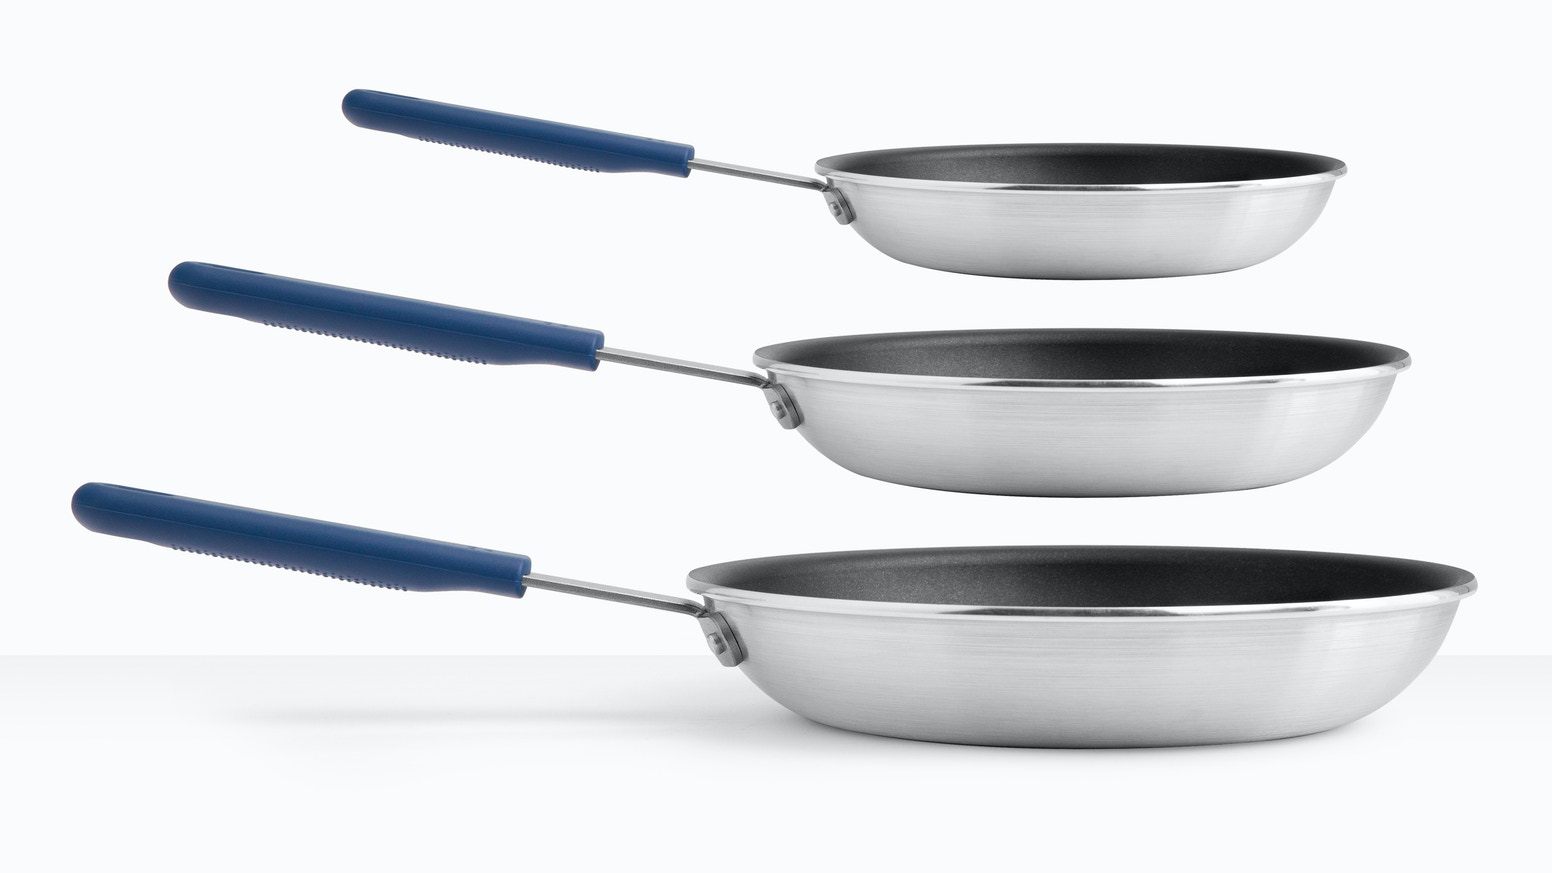 Misen 10 Skillet: The Perfect Pan for Your Kitchen Arsenal